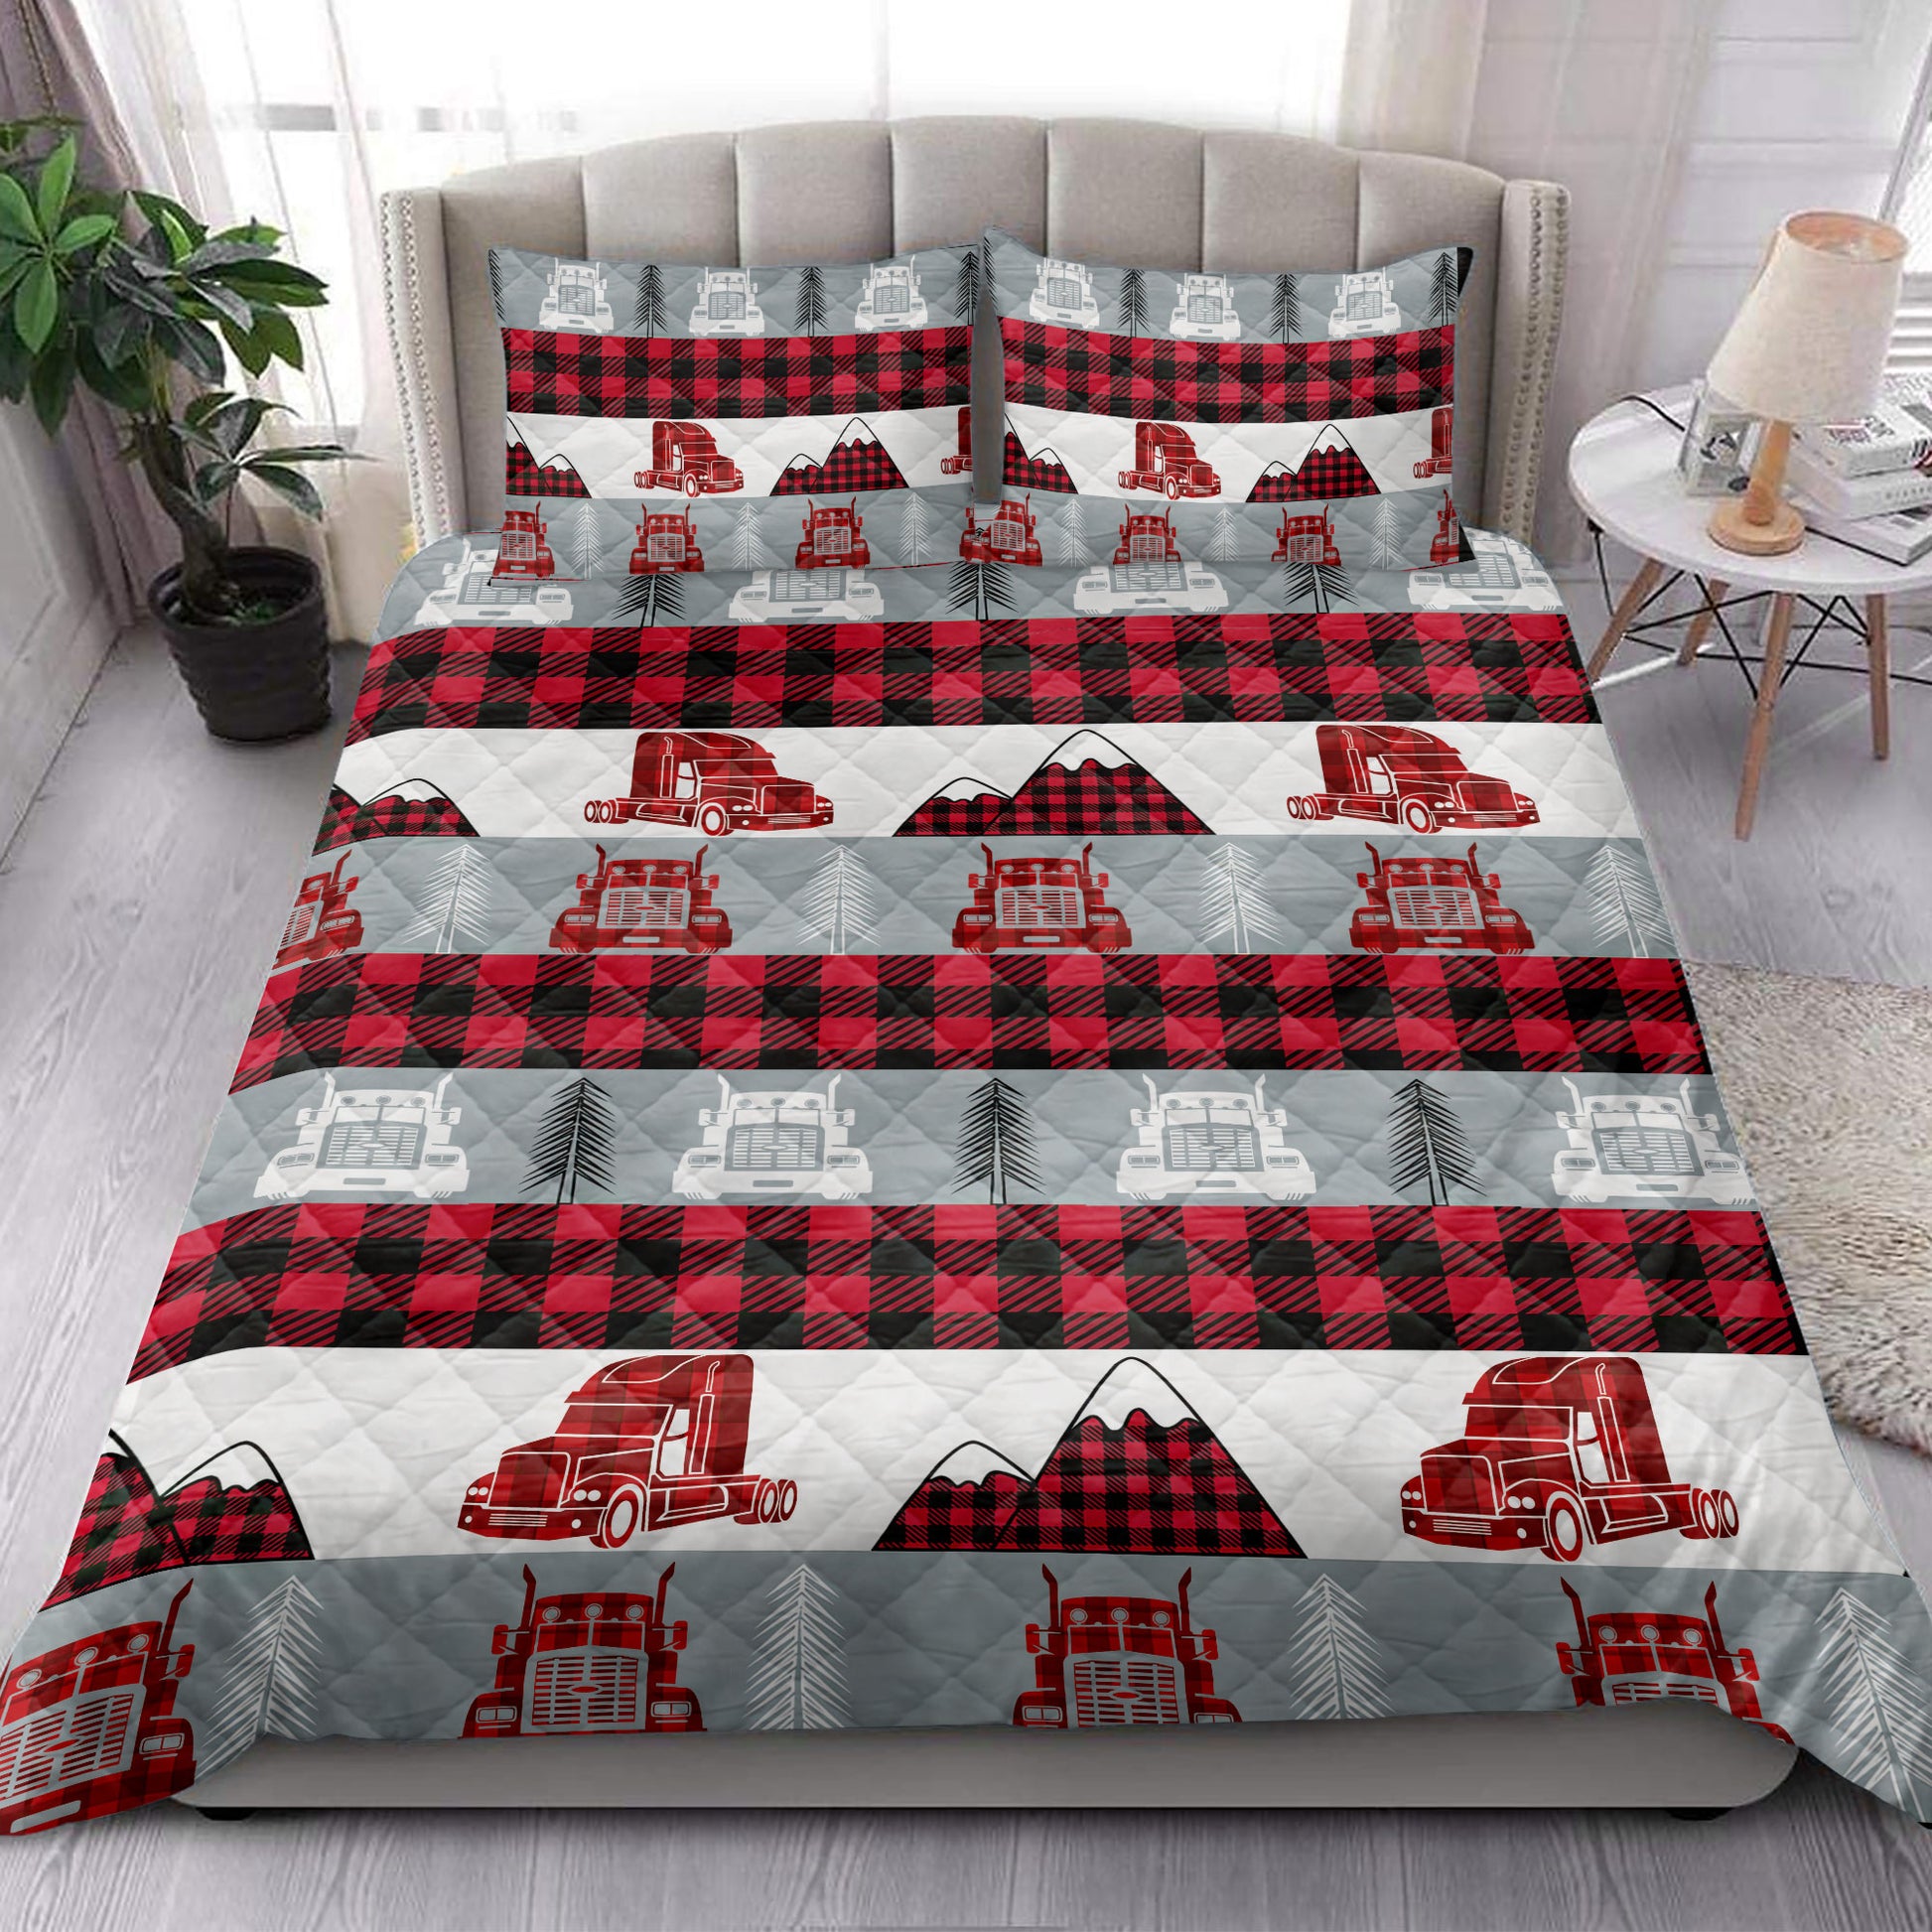 Ohaprints-Quilt-Bed-Set-Pillowcase-Christmas-Red-Truck-Trucker-Red-Buffalo-Plaid-Winter-Holiday-Blanket-Bedspread-Bedding-4088-King (90'' x 100'')